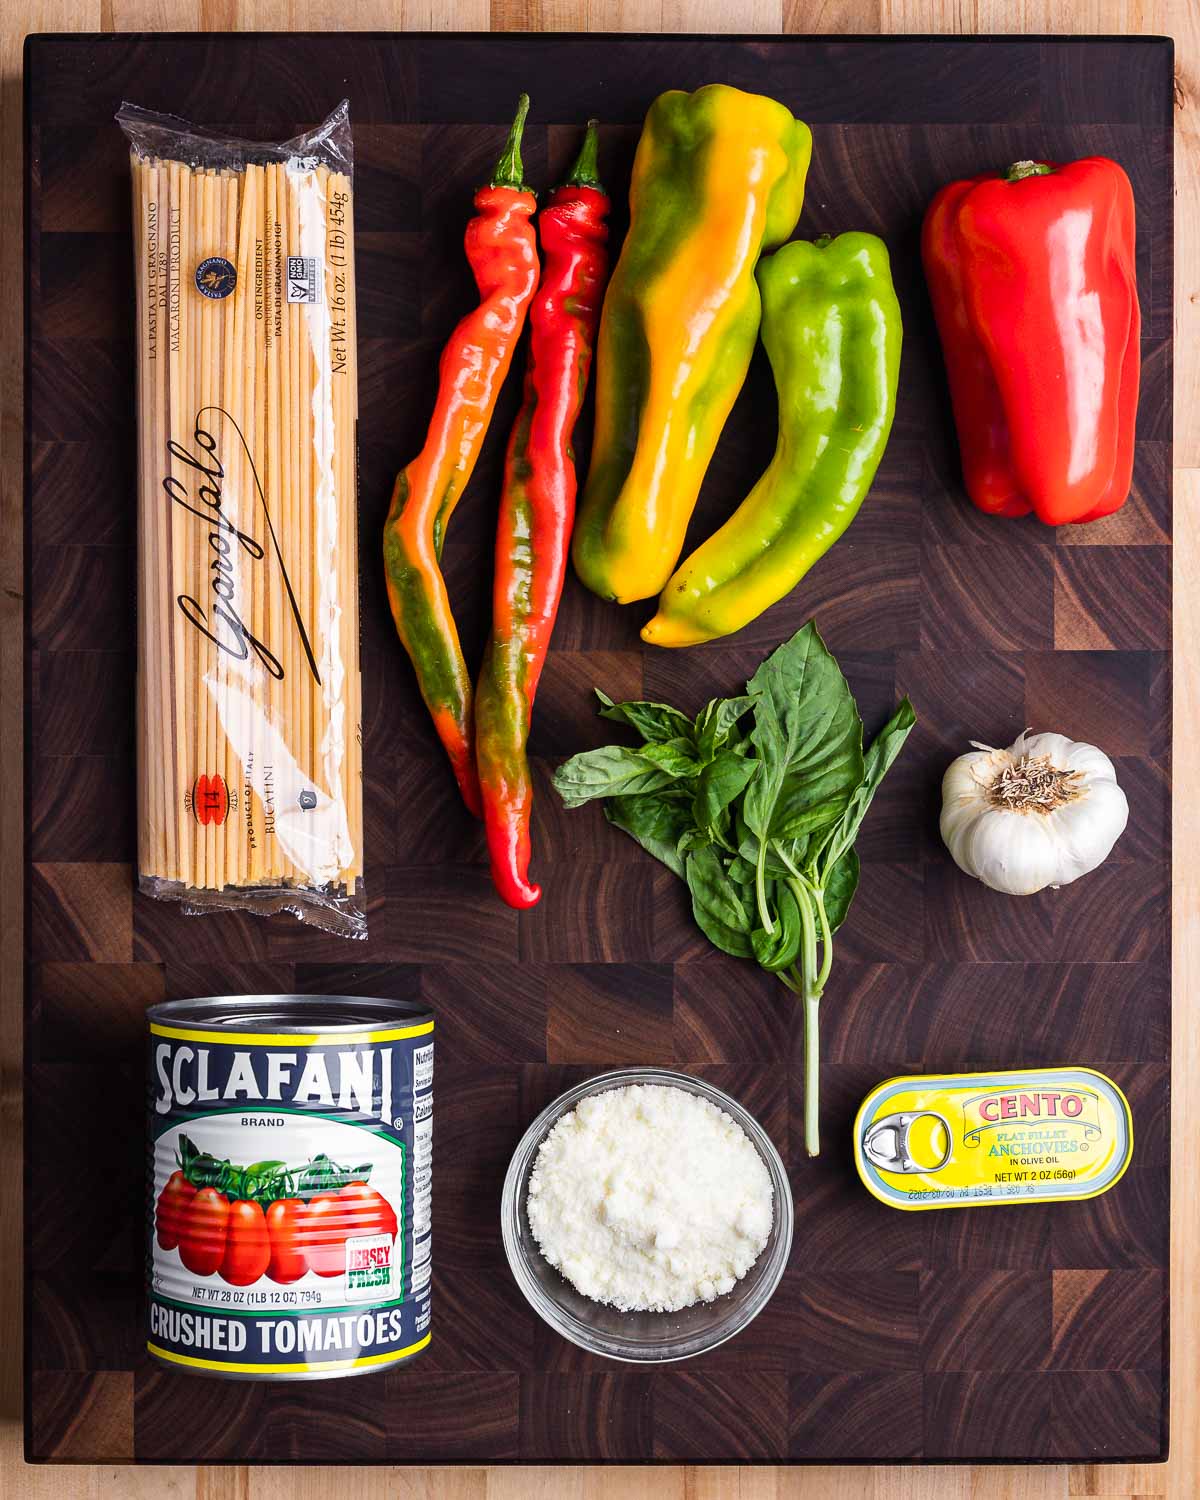 Ingredients shown: bucatini, peppers, basil, garlic, canned plum tomatoes, Pecorino Romano, and anchovies.